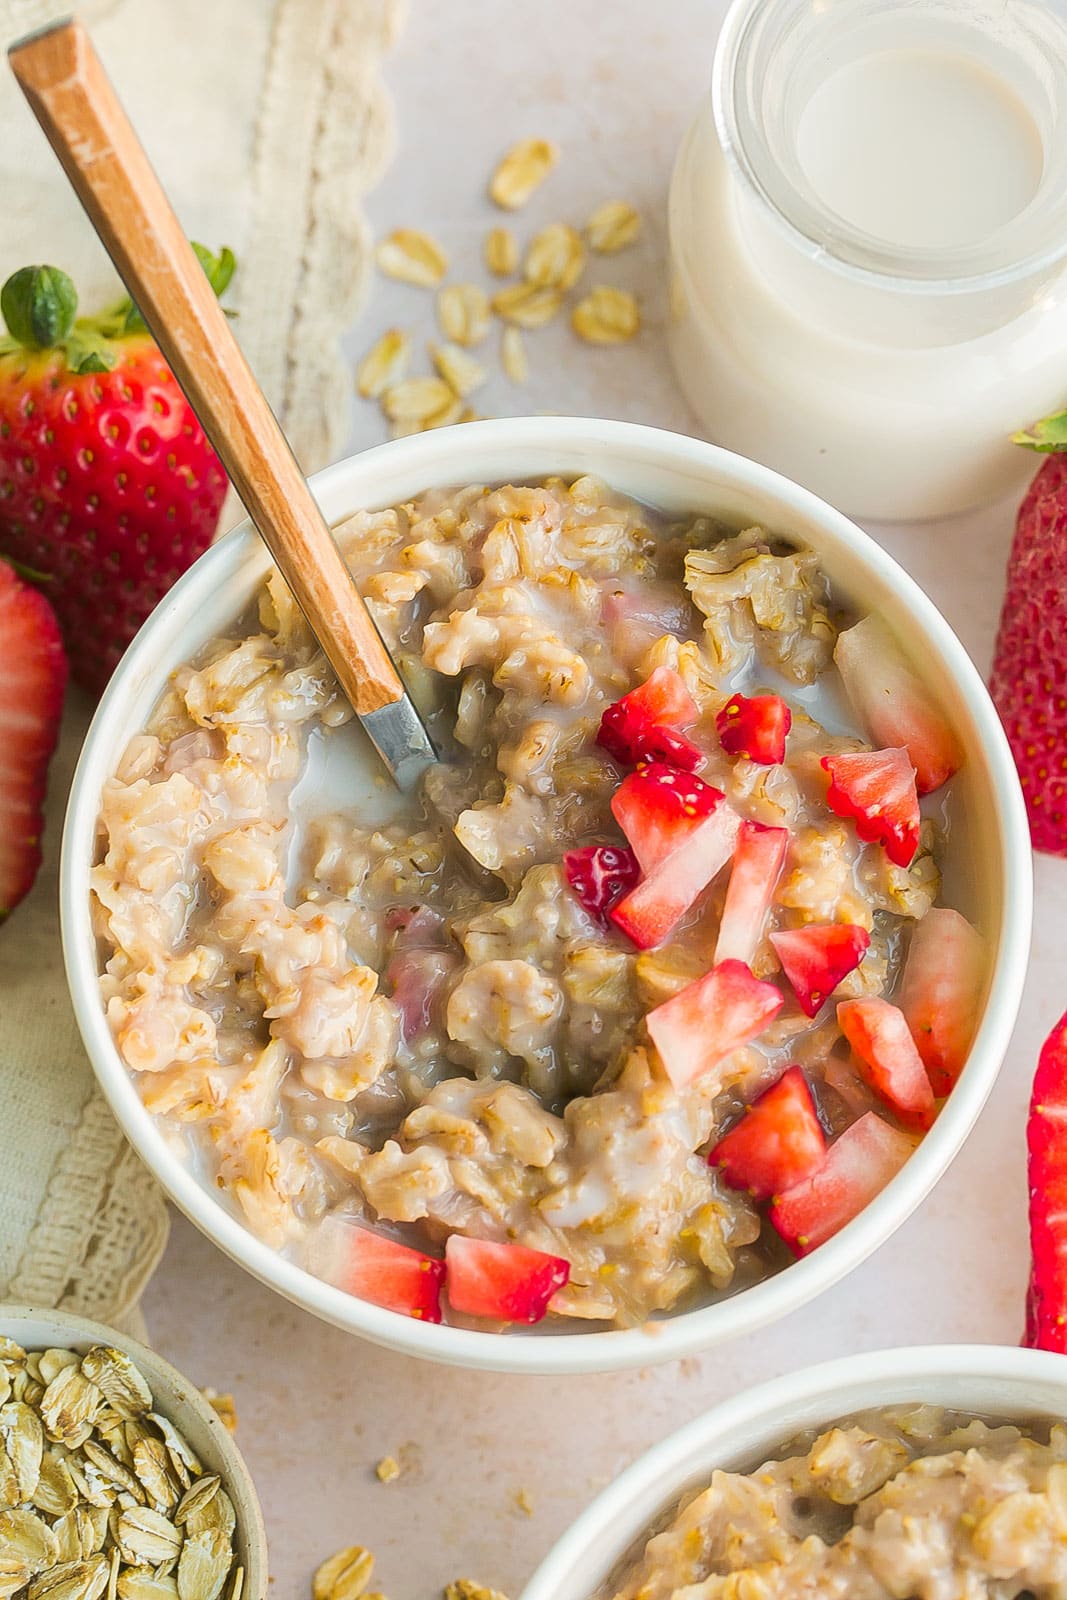 Strawberries on top with oatmeal. 